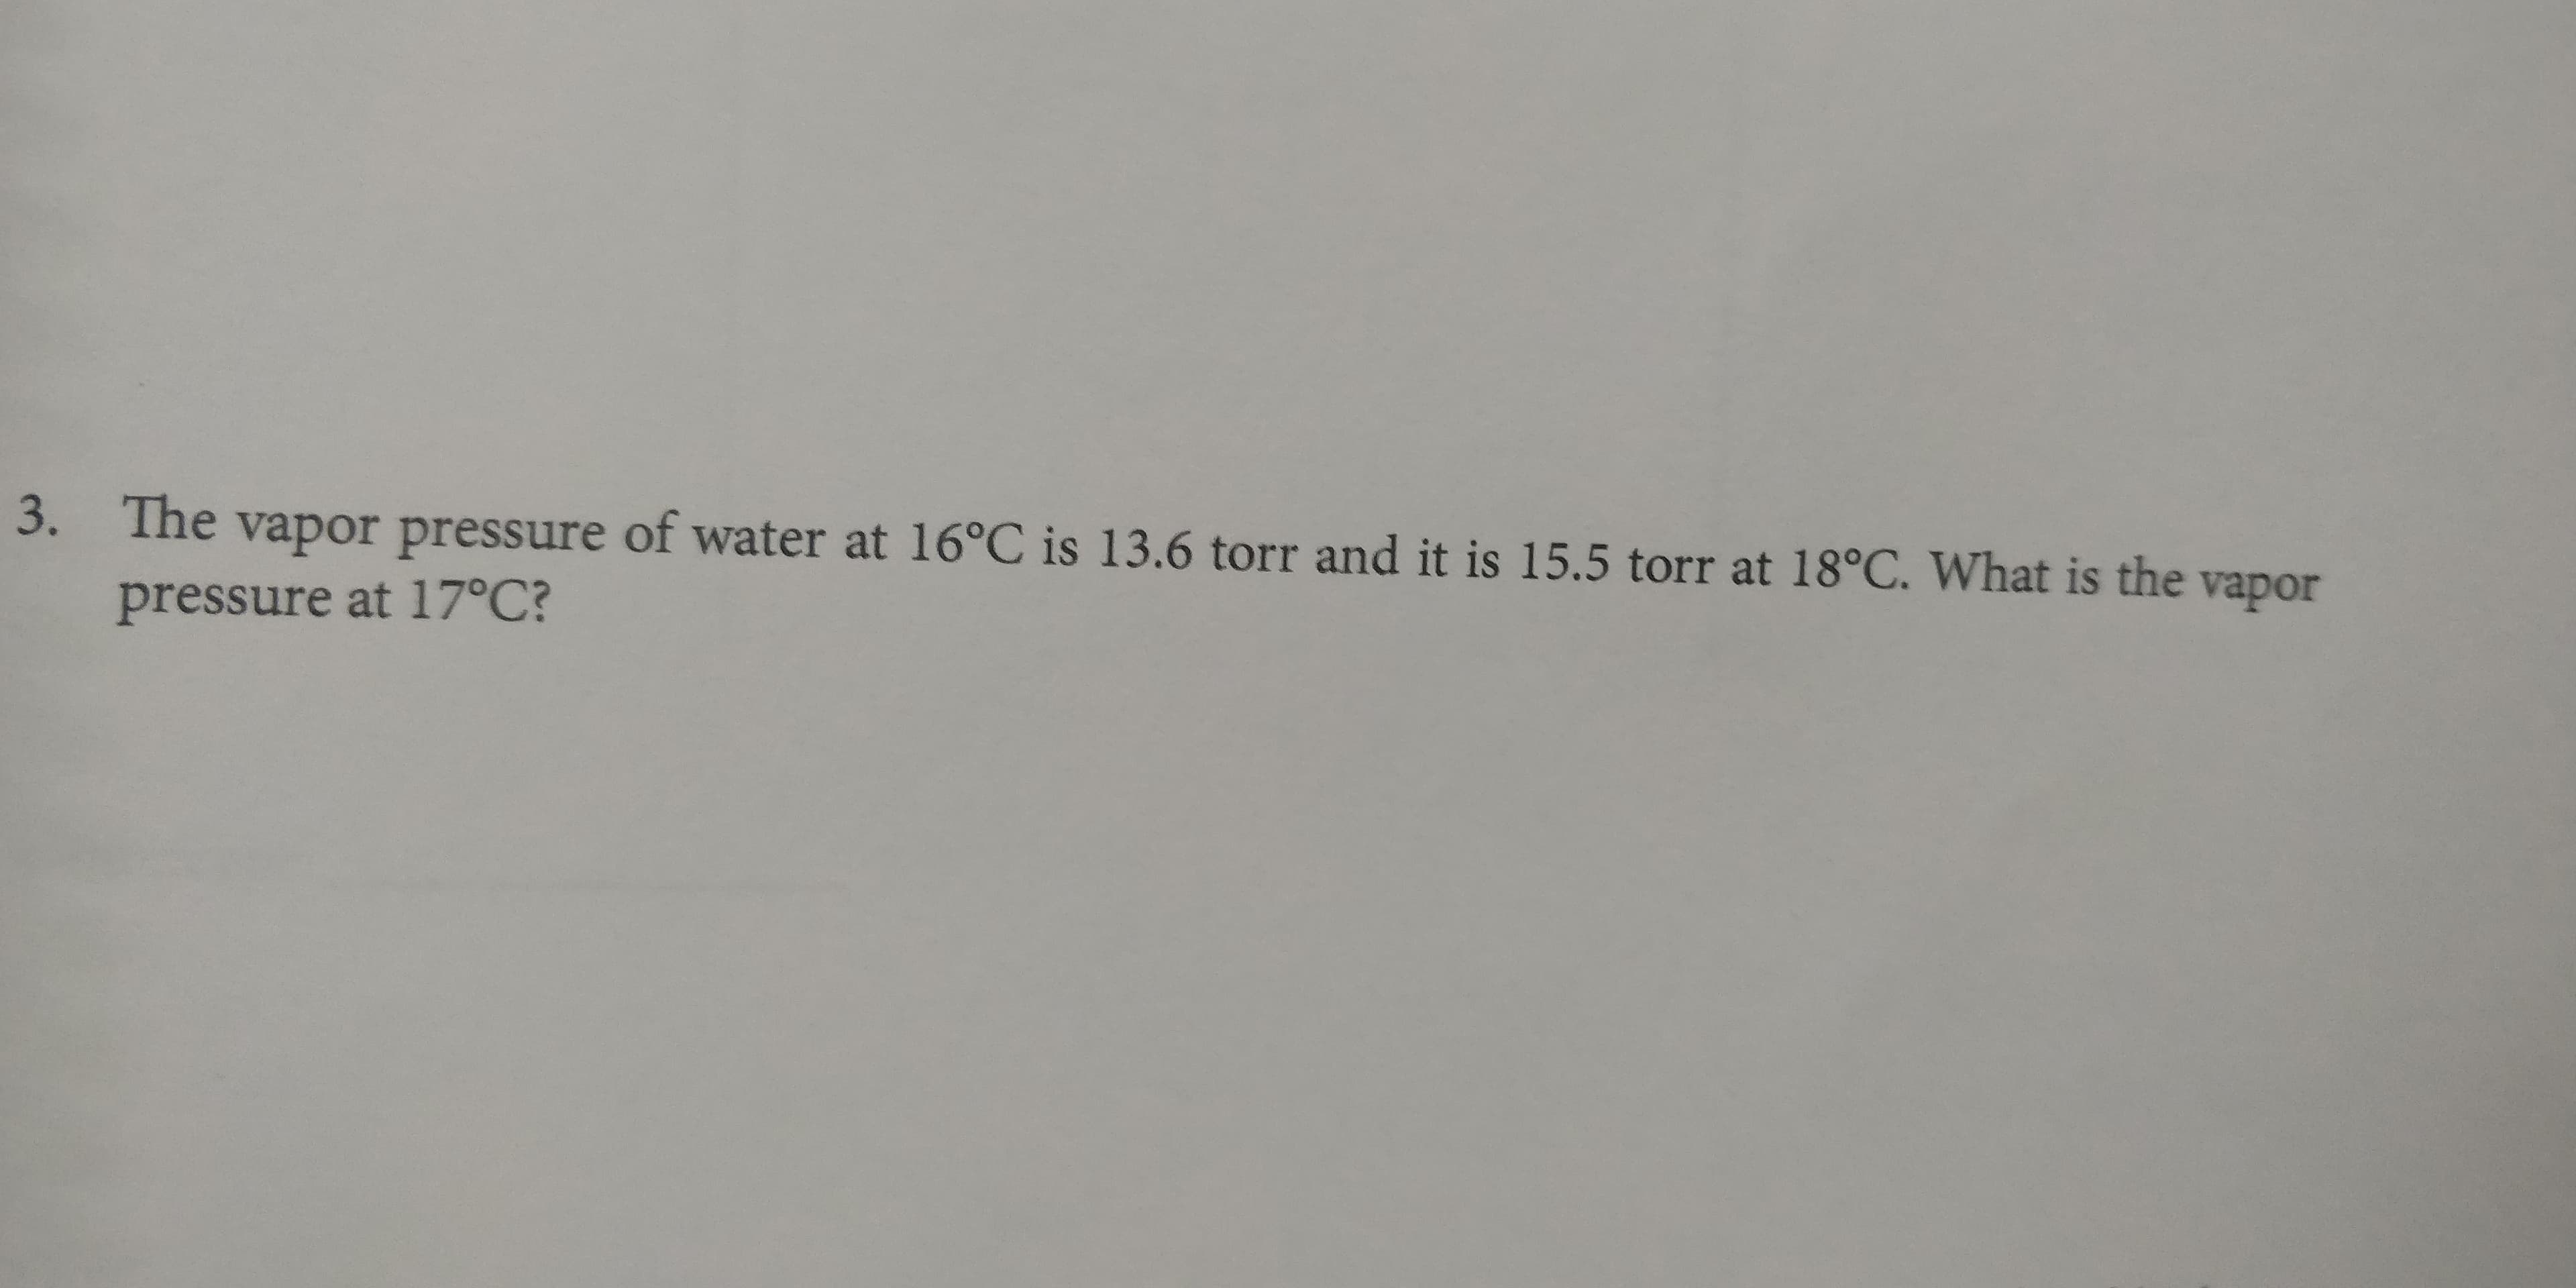 The vapor pressure of water at 16°C is 13.6 torr and it is 15.5 torr at 18°C. What is the vapor
3.
pressure at 17°C?
